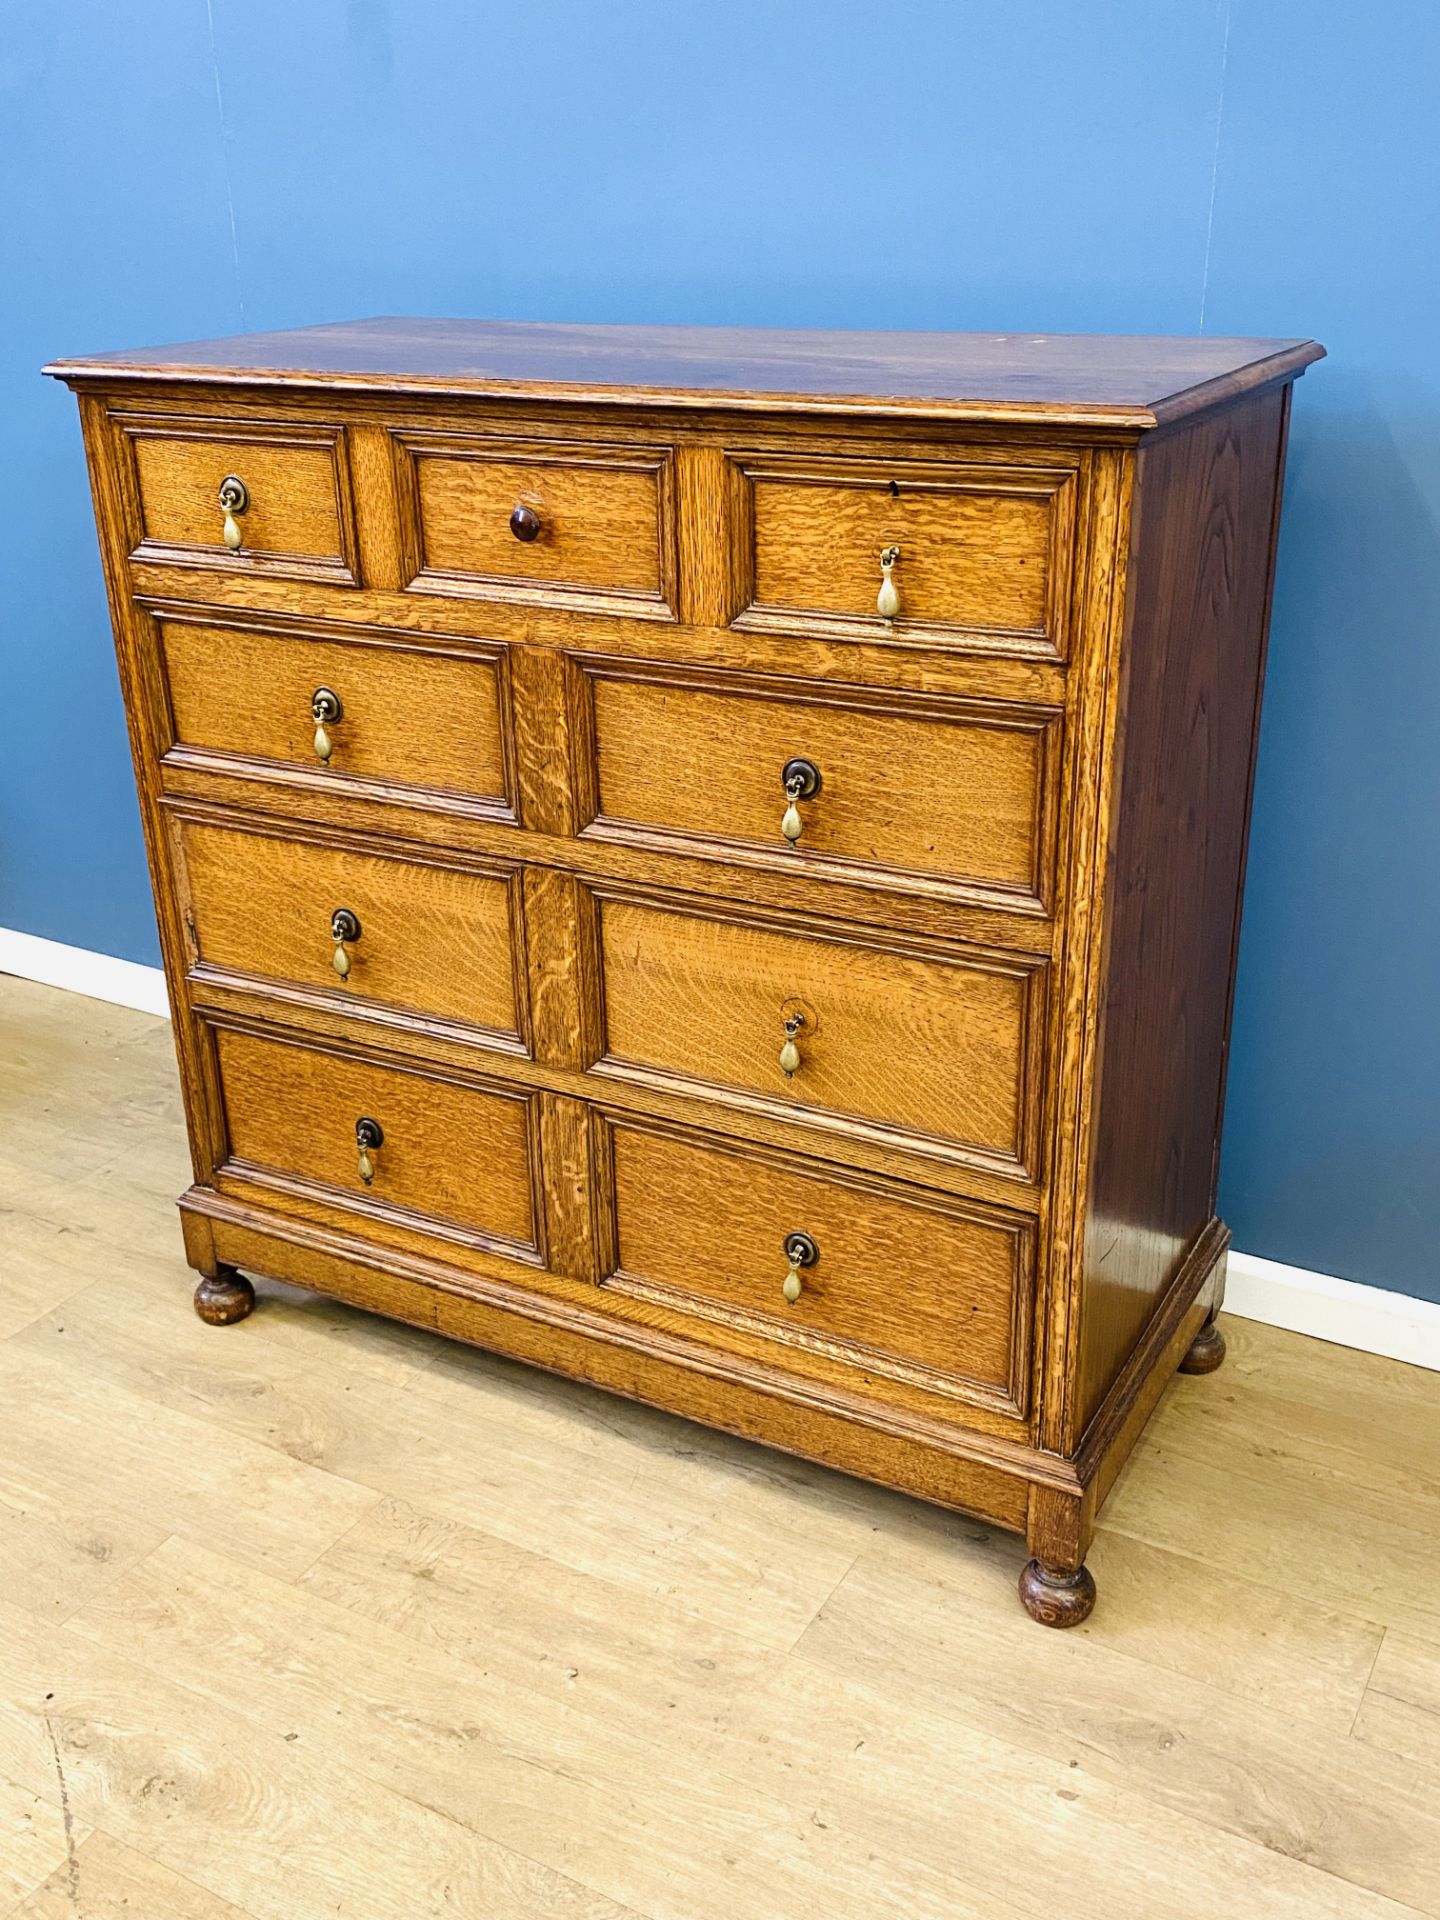 Oak 17th century style chest of drawers - Image 2 of 6